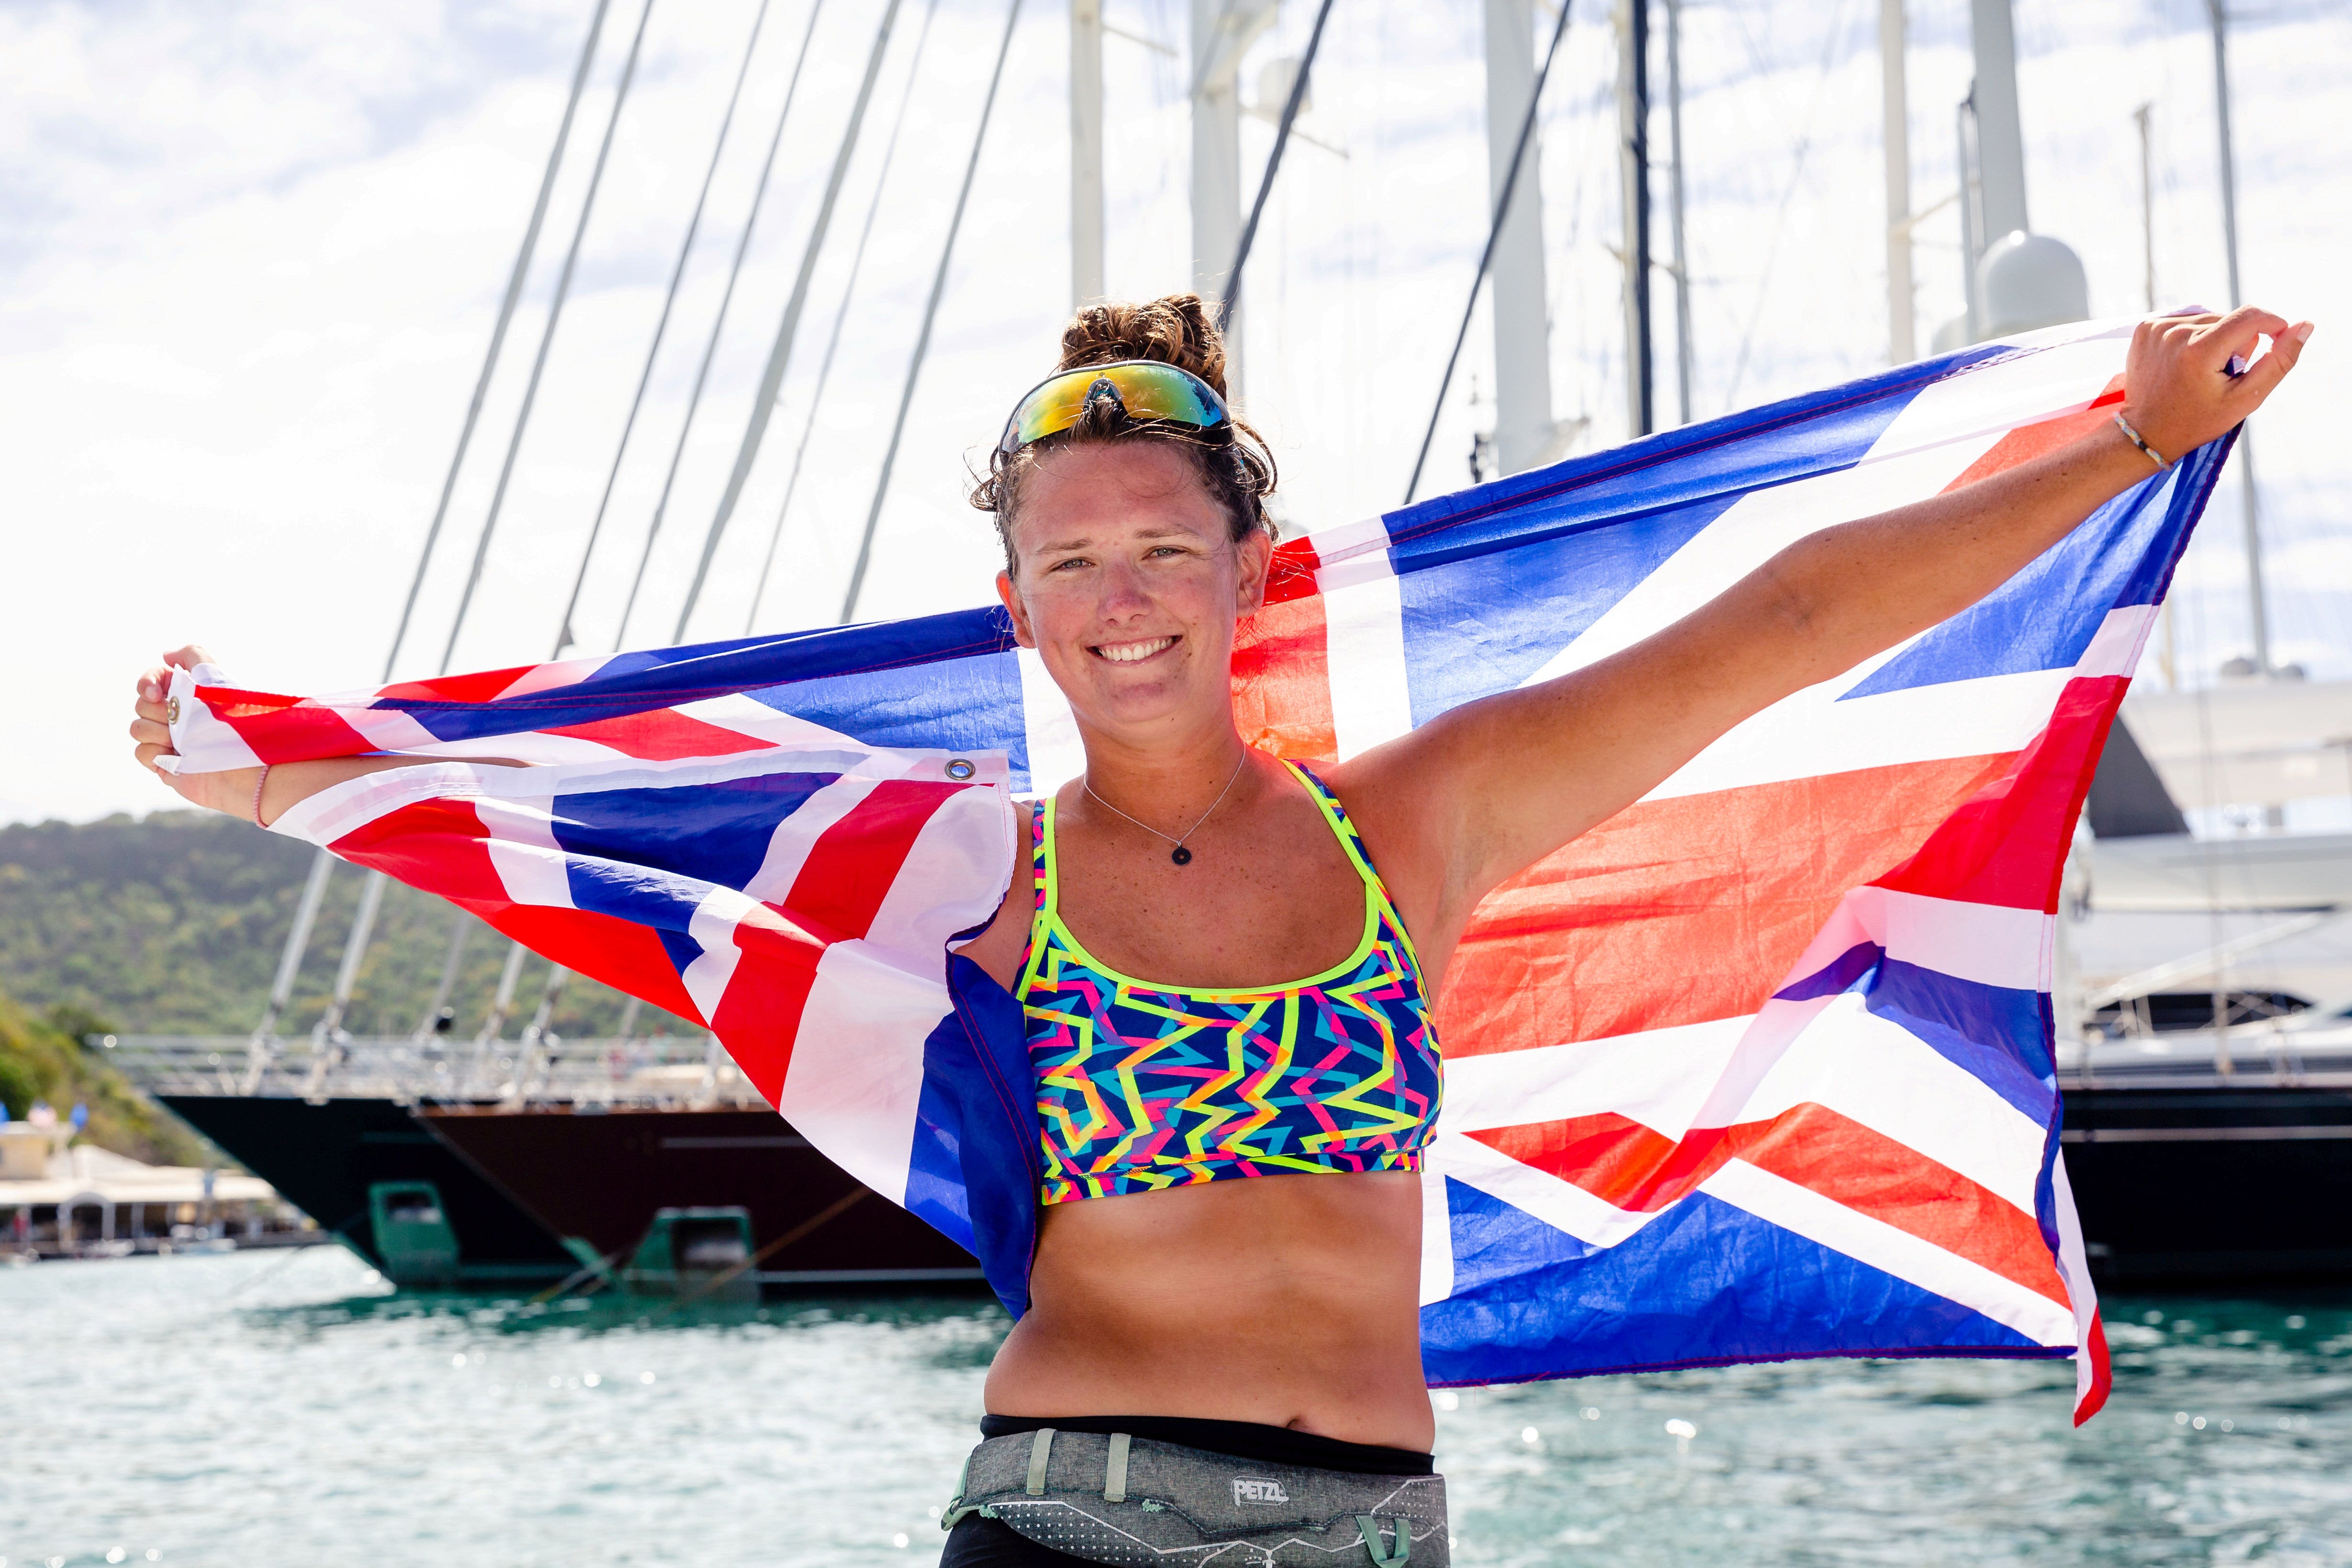 Solo woman rows across Atlantic Ocean, becomes youngest female to make the journey